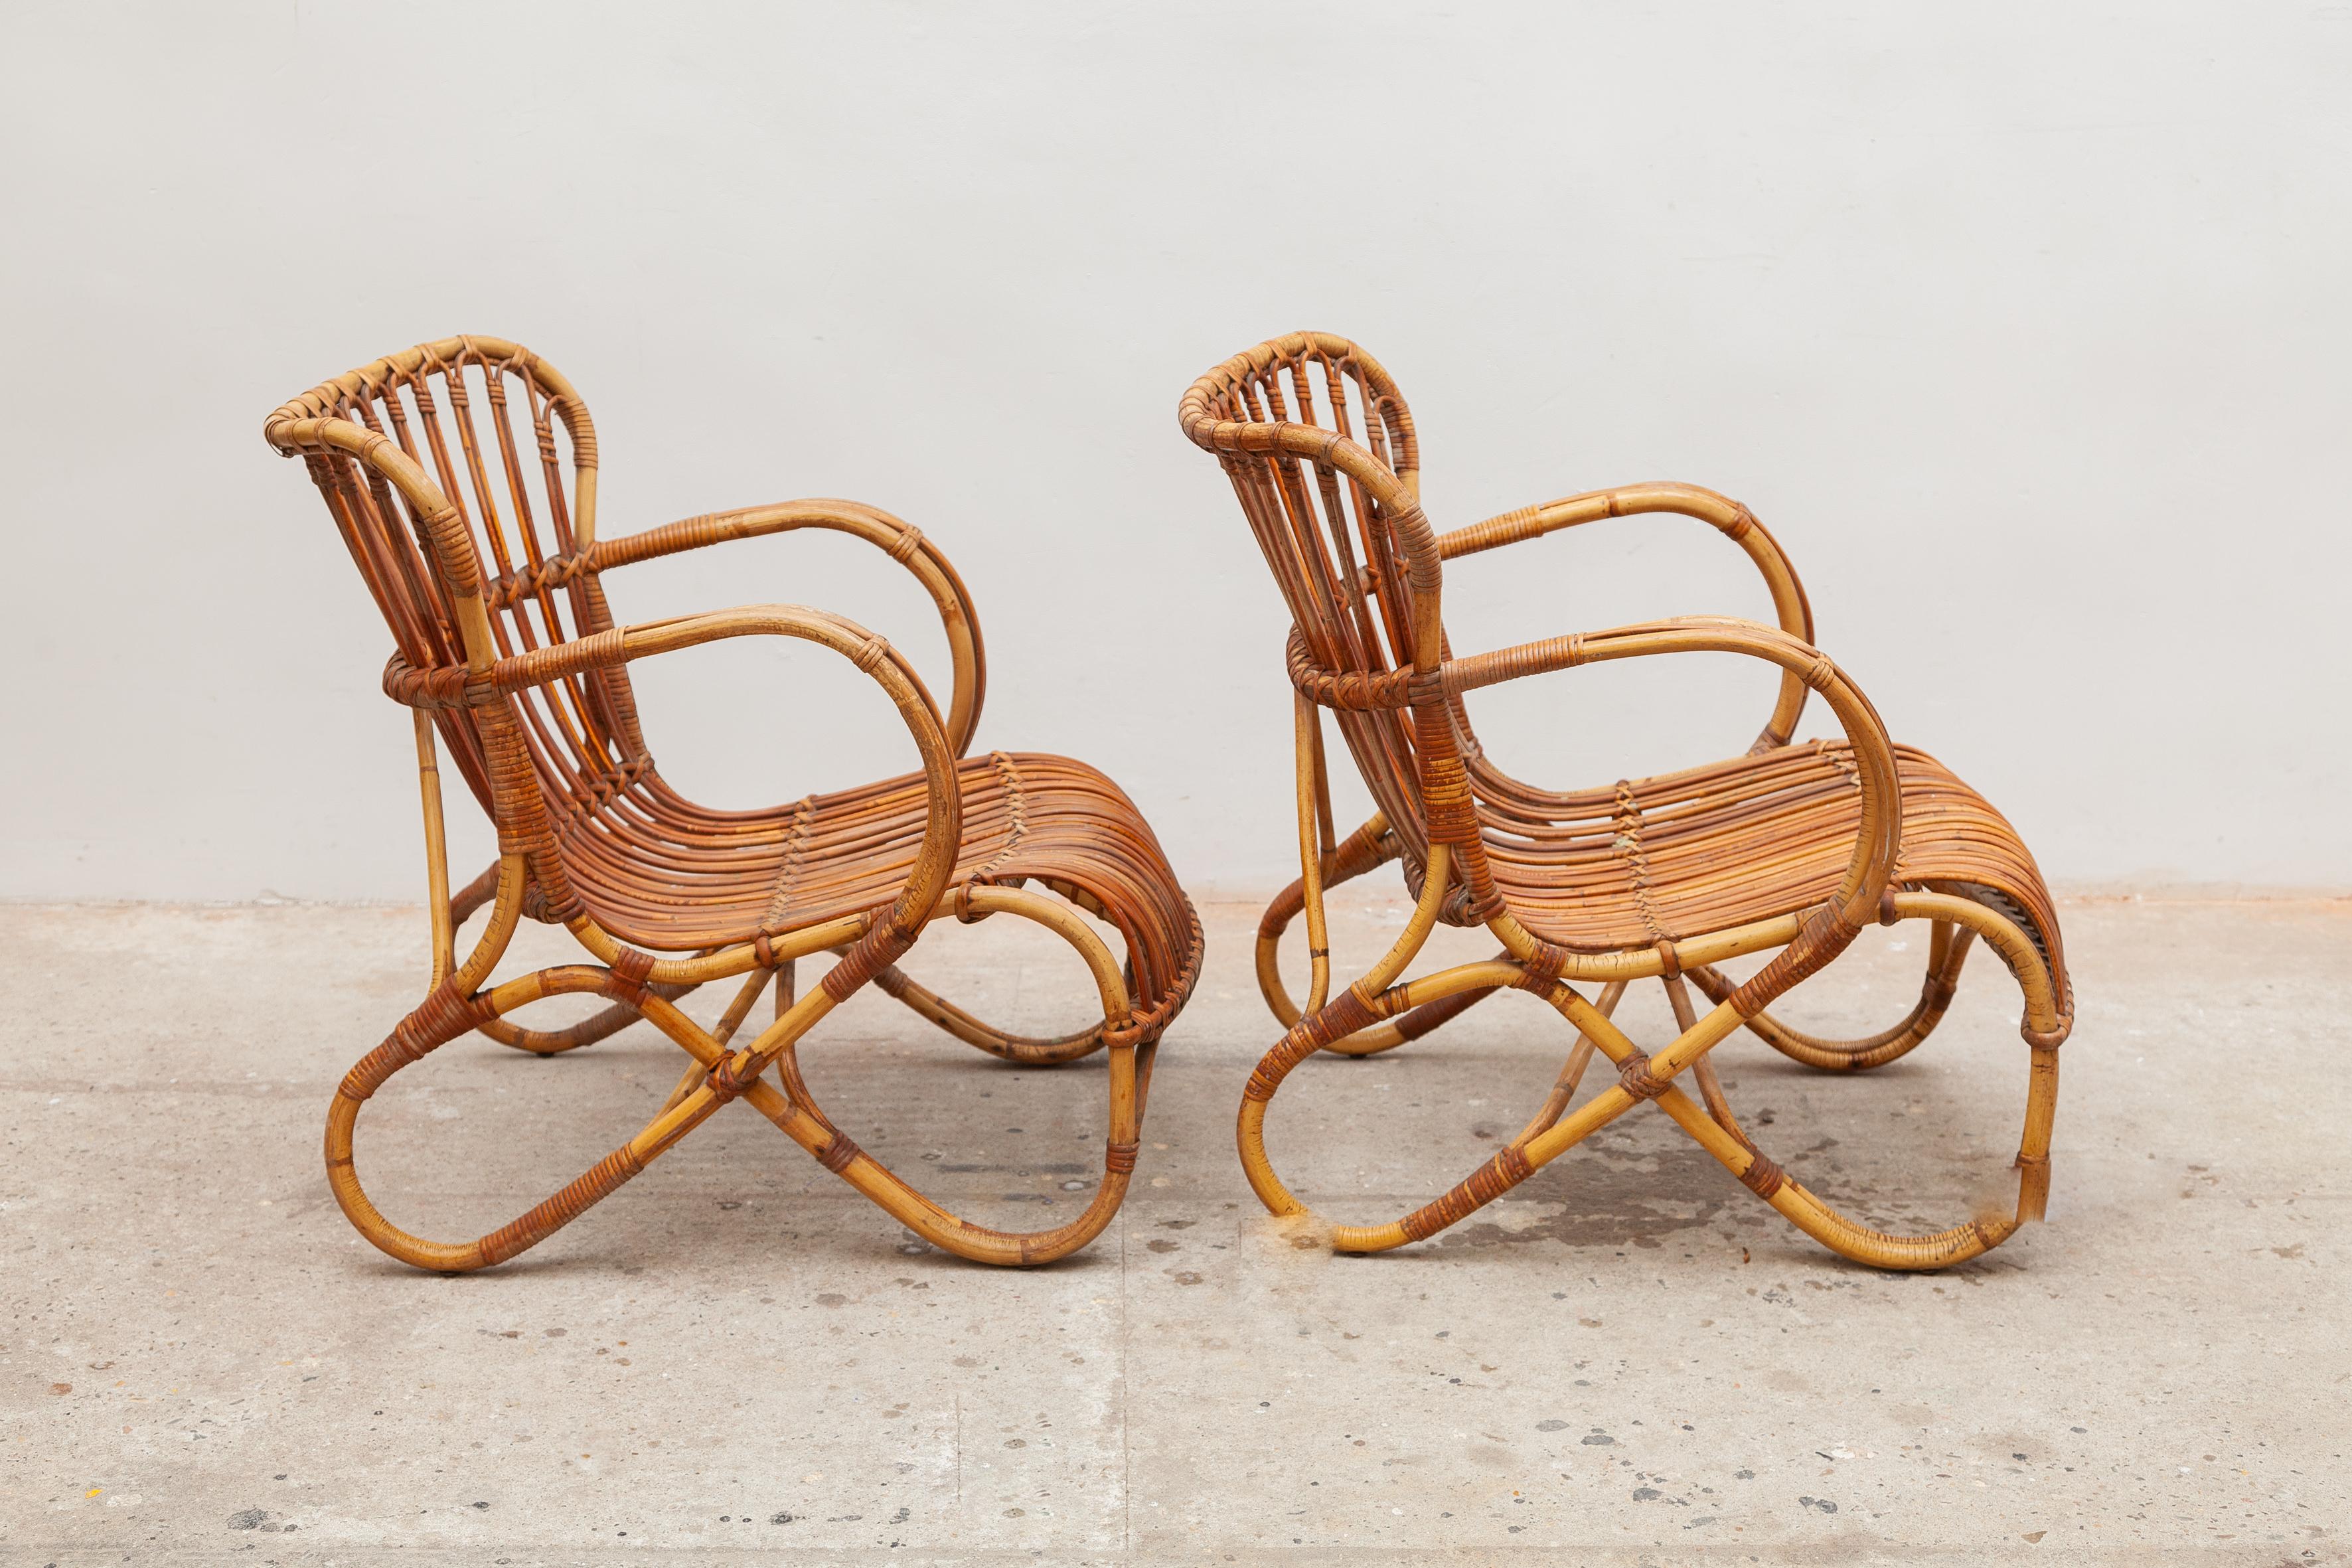 Vintage midcentury bamboo wicker lounge chairs. Sculptural looping frame with woven seats.
Dimensions: 56 W x 70 H x 68 D cm, seat: 34cm high. Original very good condition.